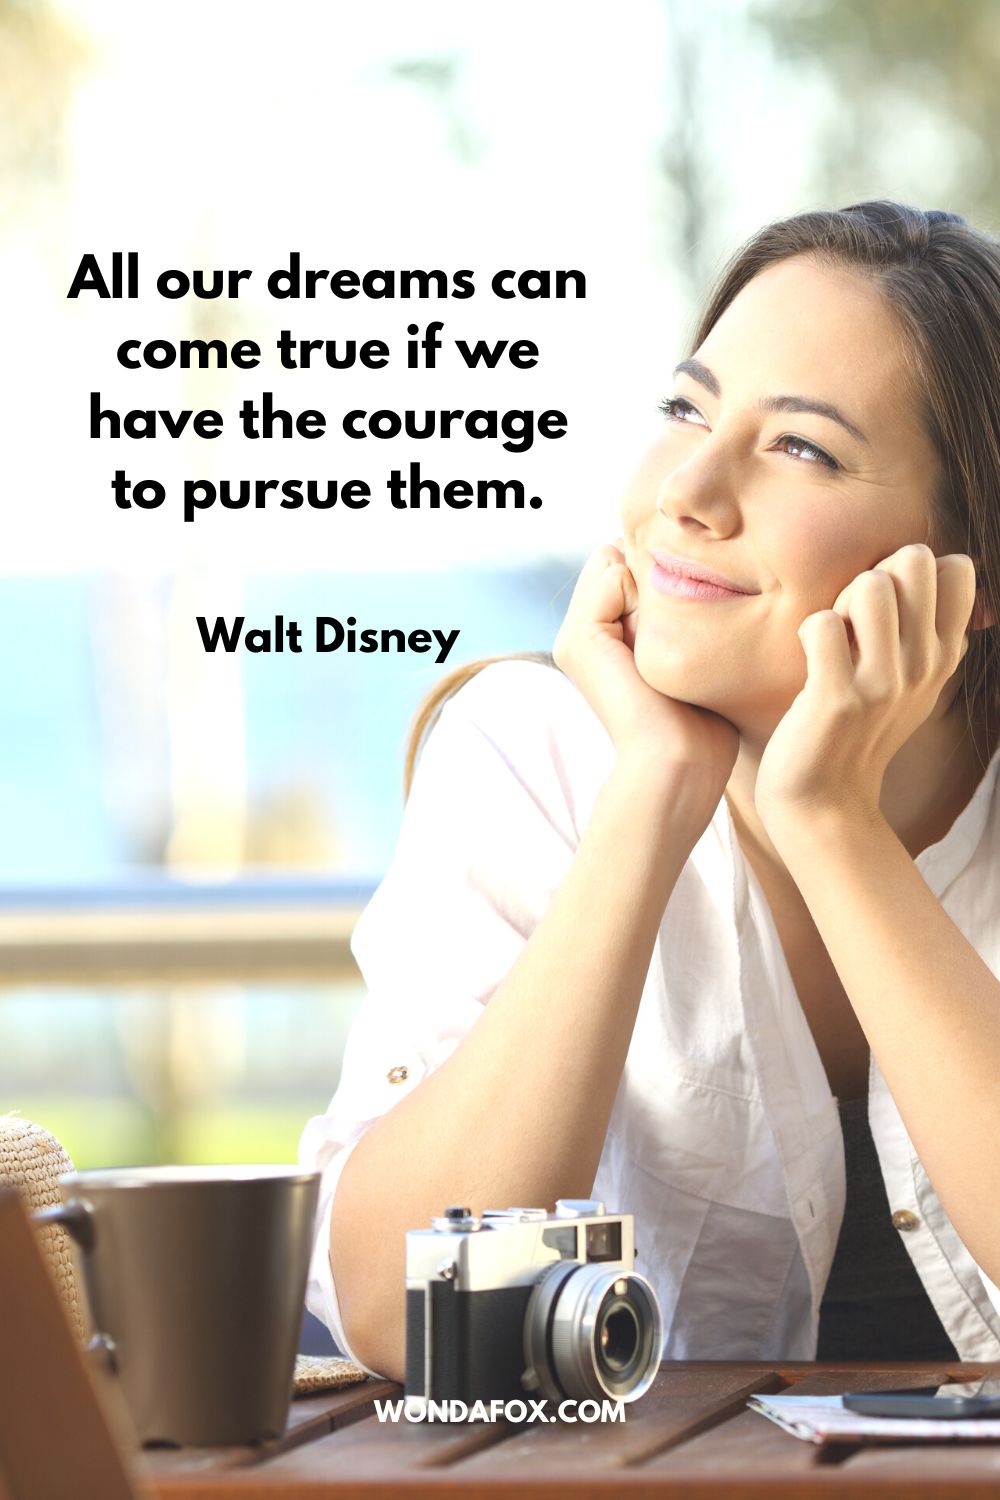 All our dreams can come true if we have the courage to pursue them. Walt Disney